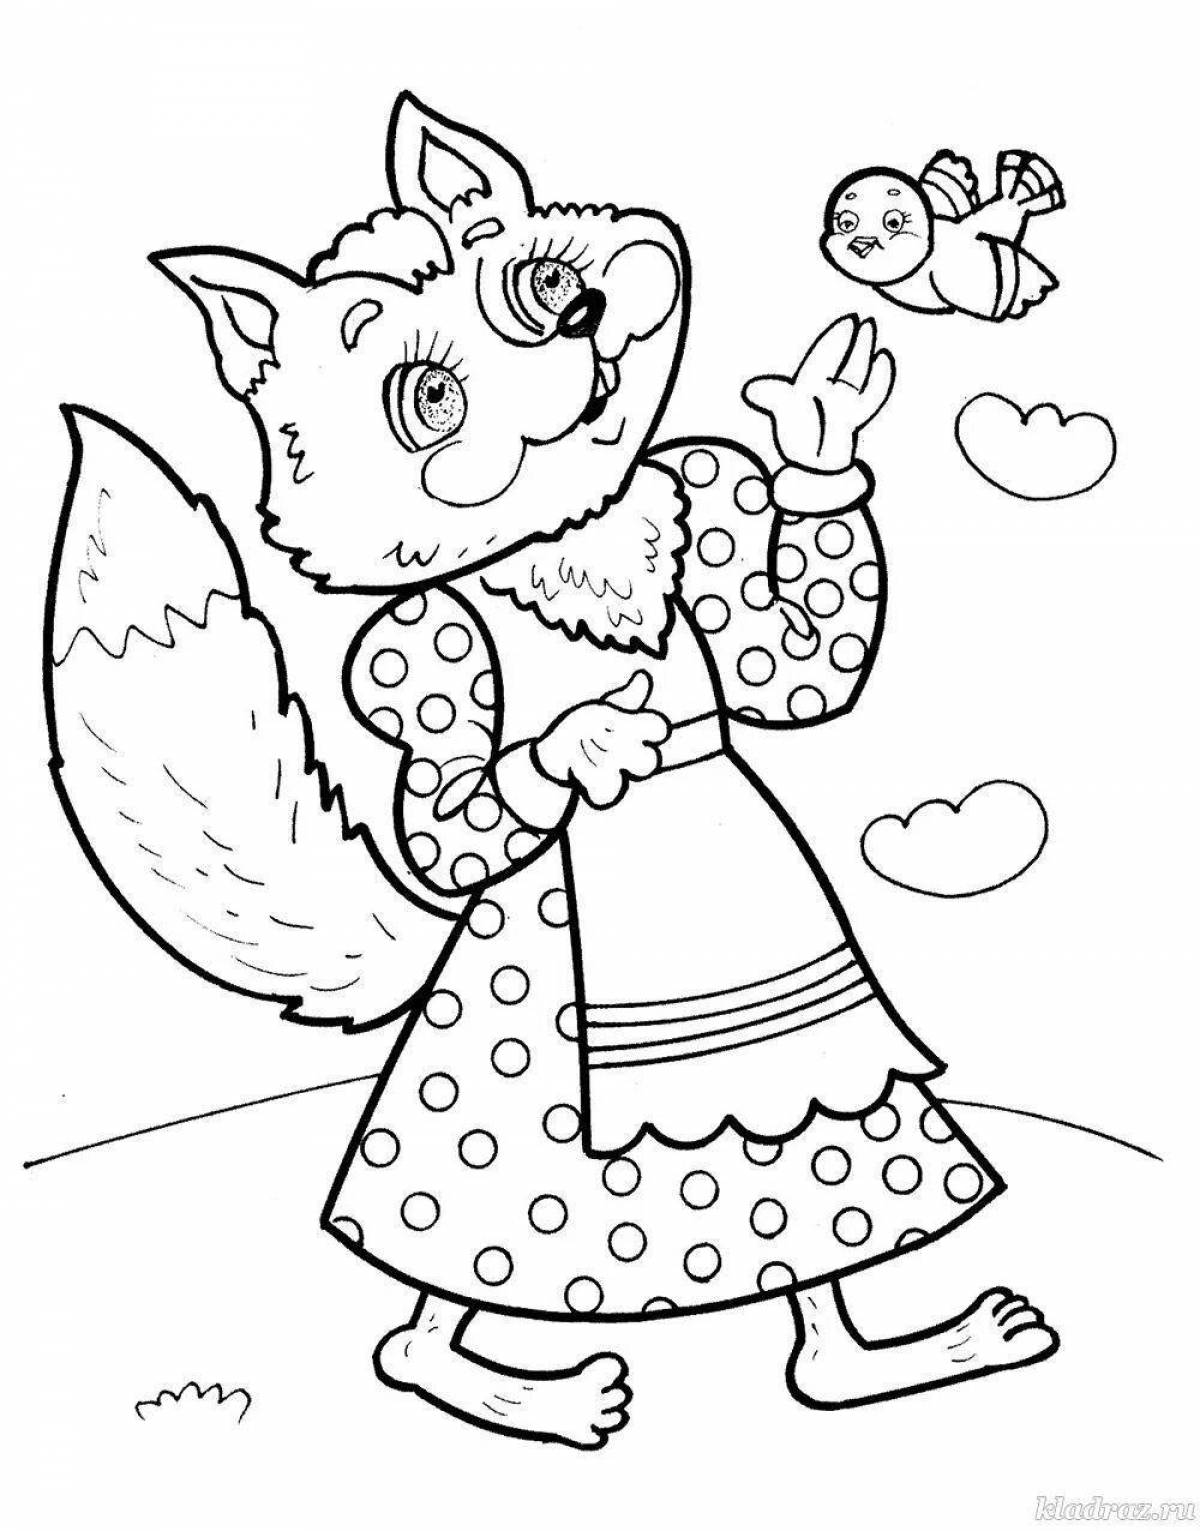 Funny fox and rabbit coloring book